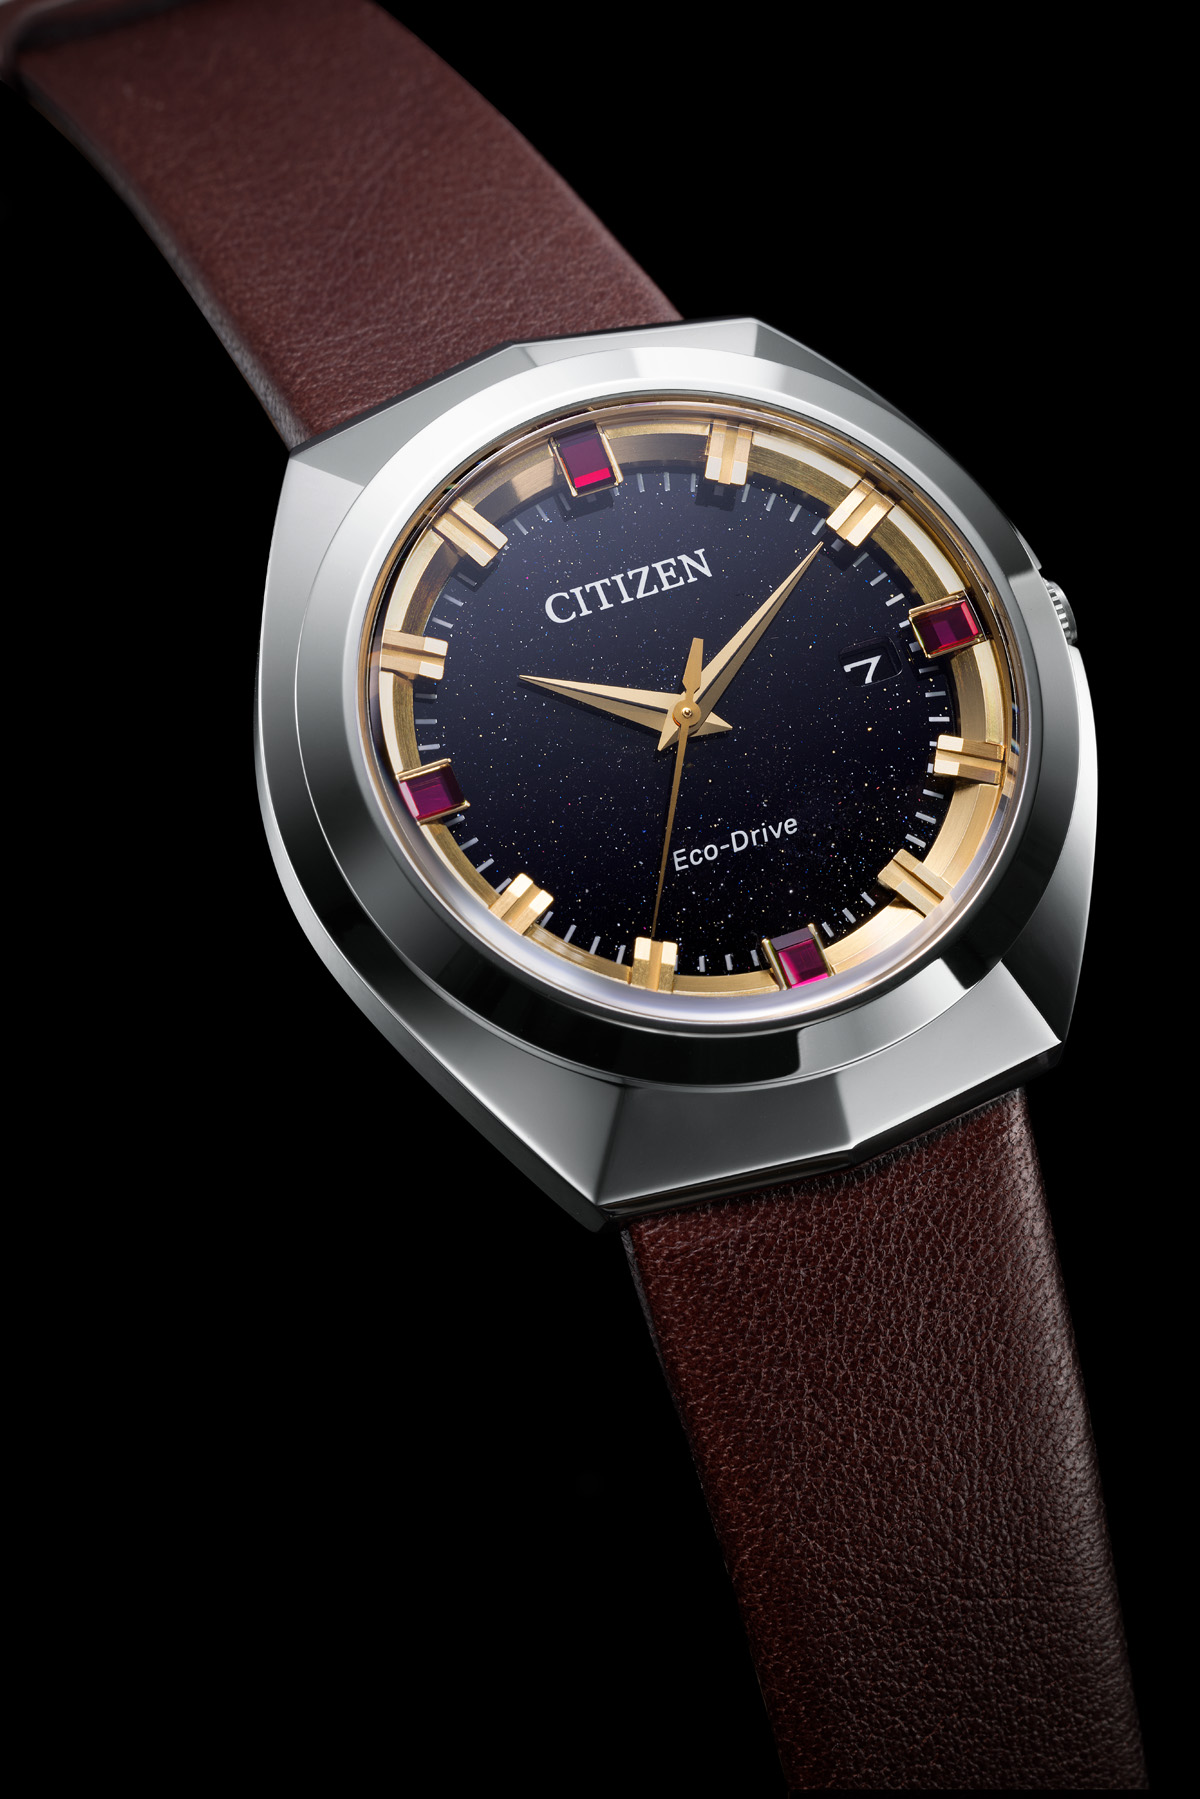 New: Citizen ups the ante with an Eco-Drive model with 365 days of running  time -